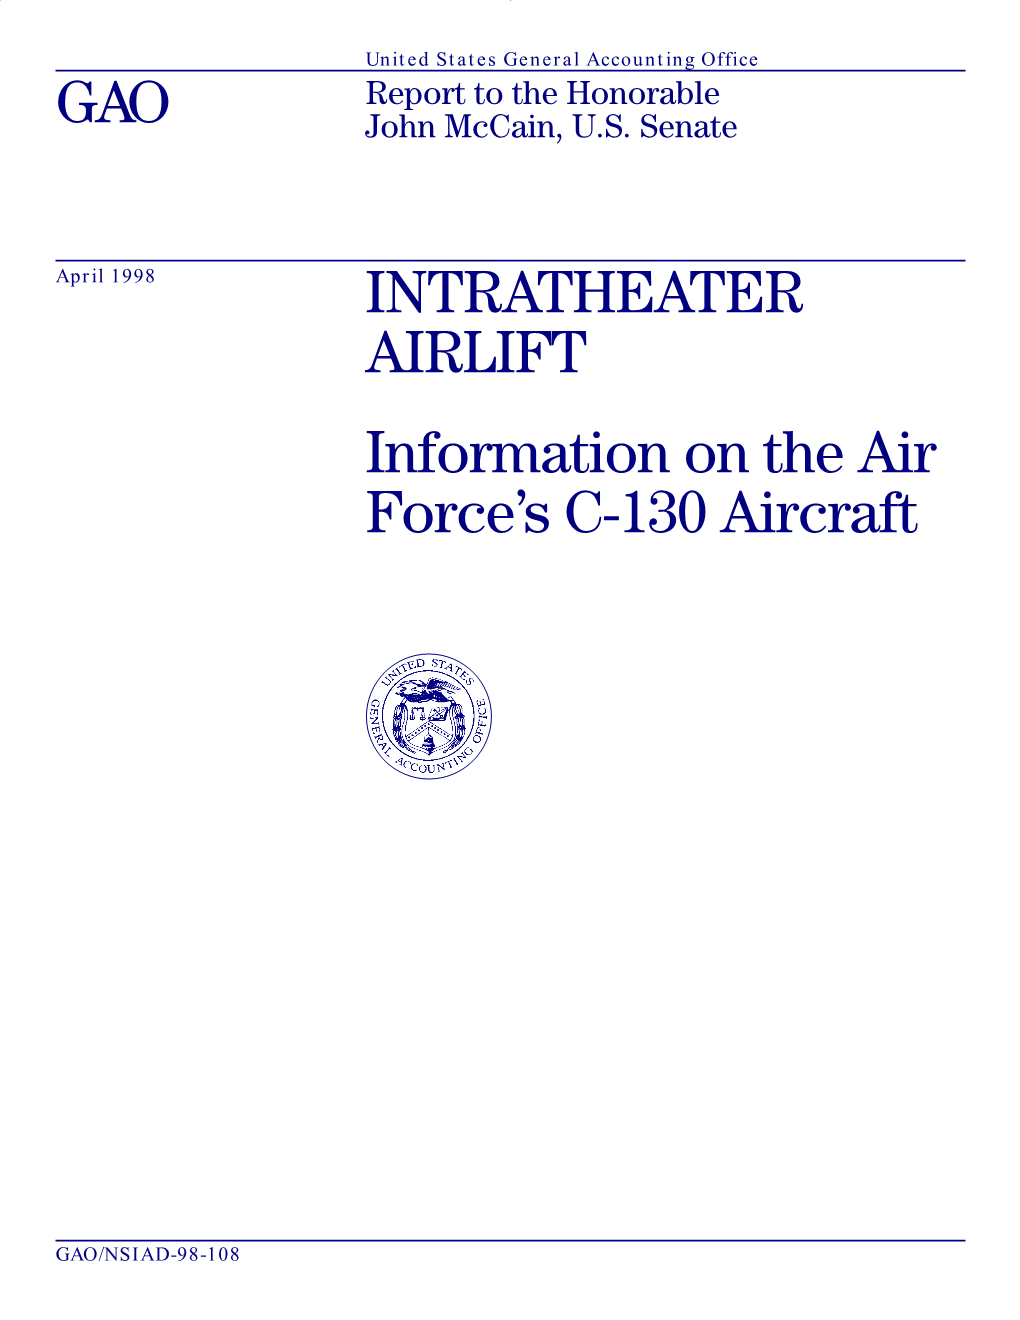 Information on the Air Force's C-130 Aircraft